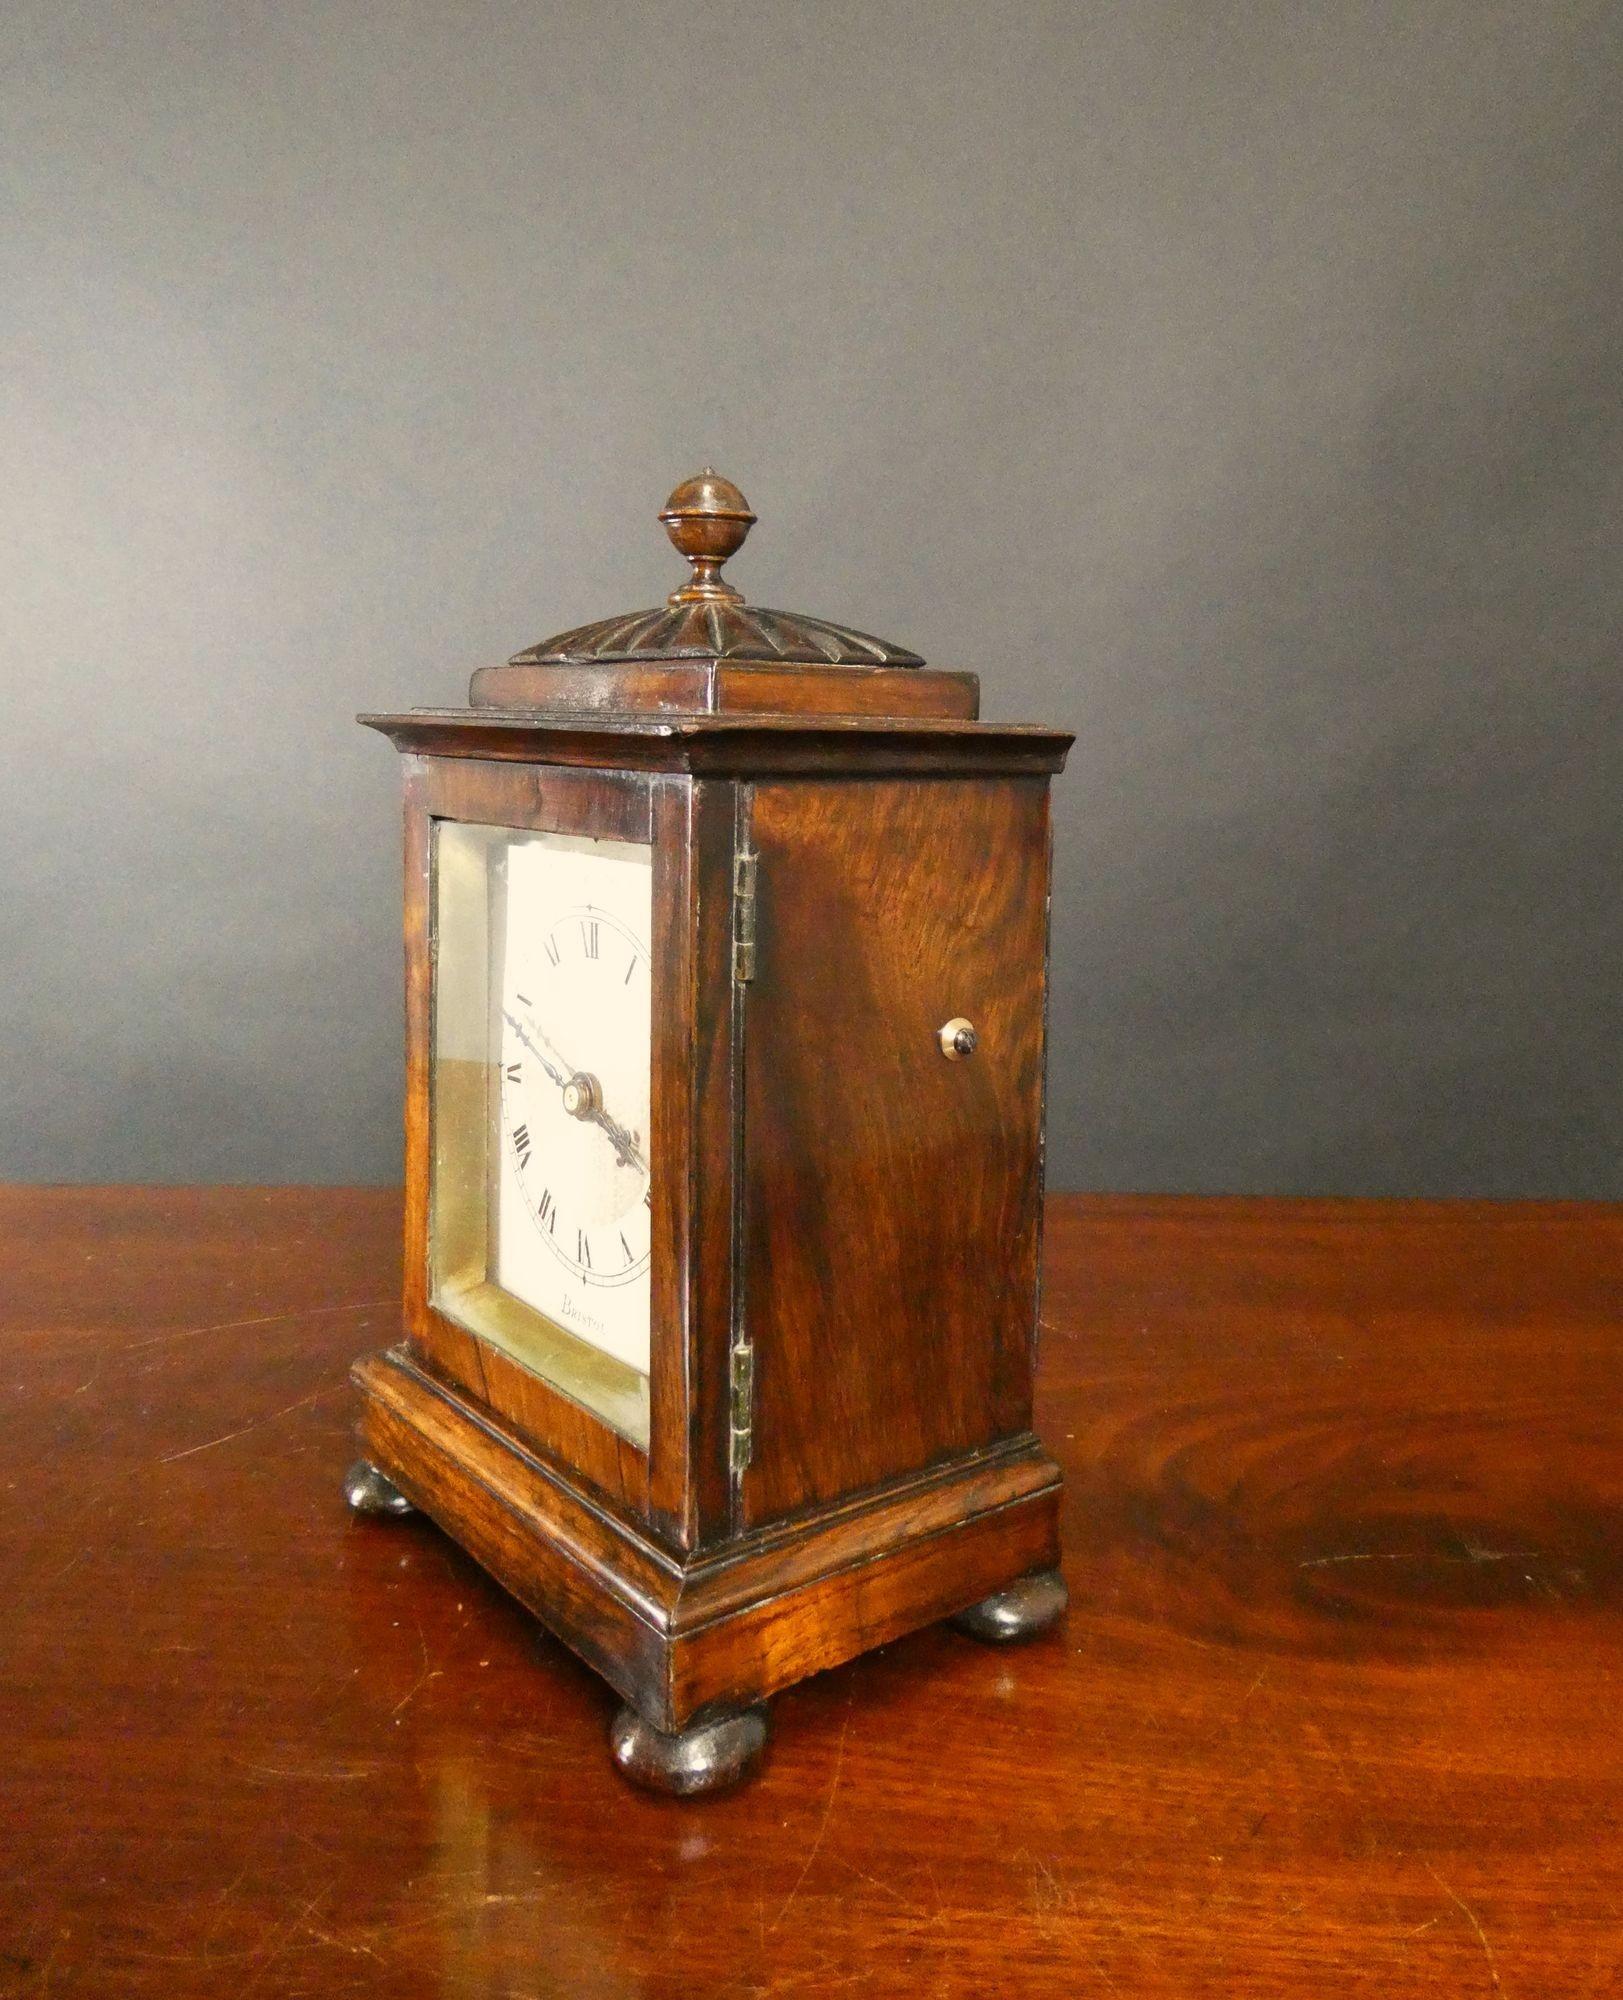 Miniature ‘Bracket’ style mantel clock in a finely figured Rosewood case with a gadroon top standing on bun feet and mounted with a spherical finial.

Fine engine turning to the silvered dial with Roman numerals, original ‘blued’ steel hands signed